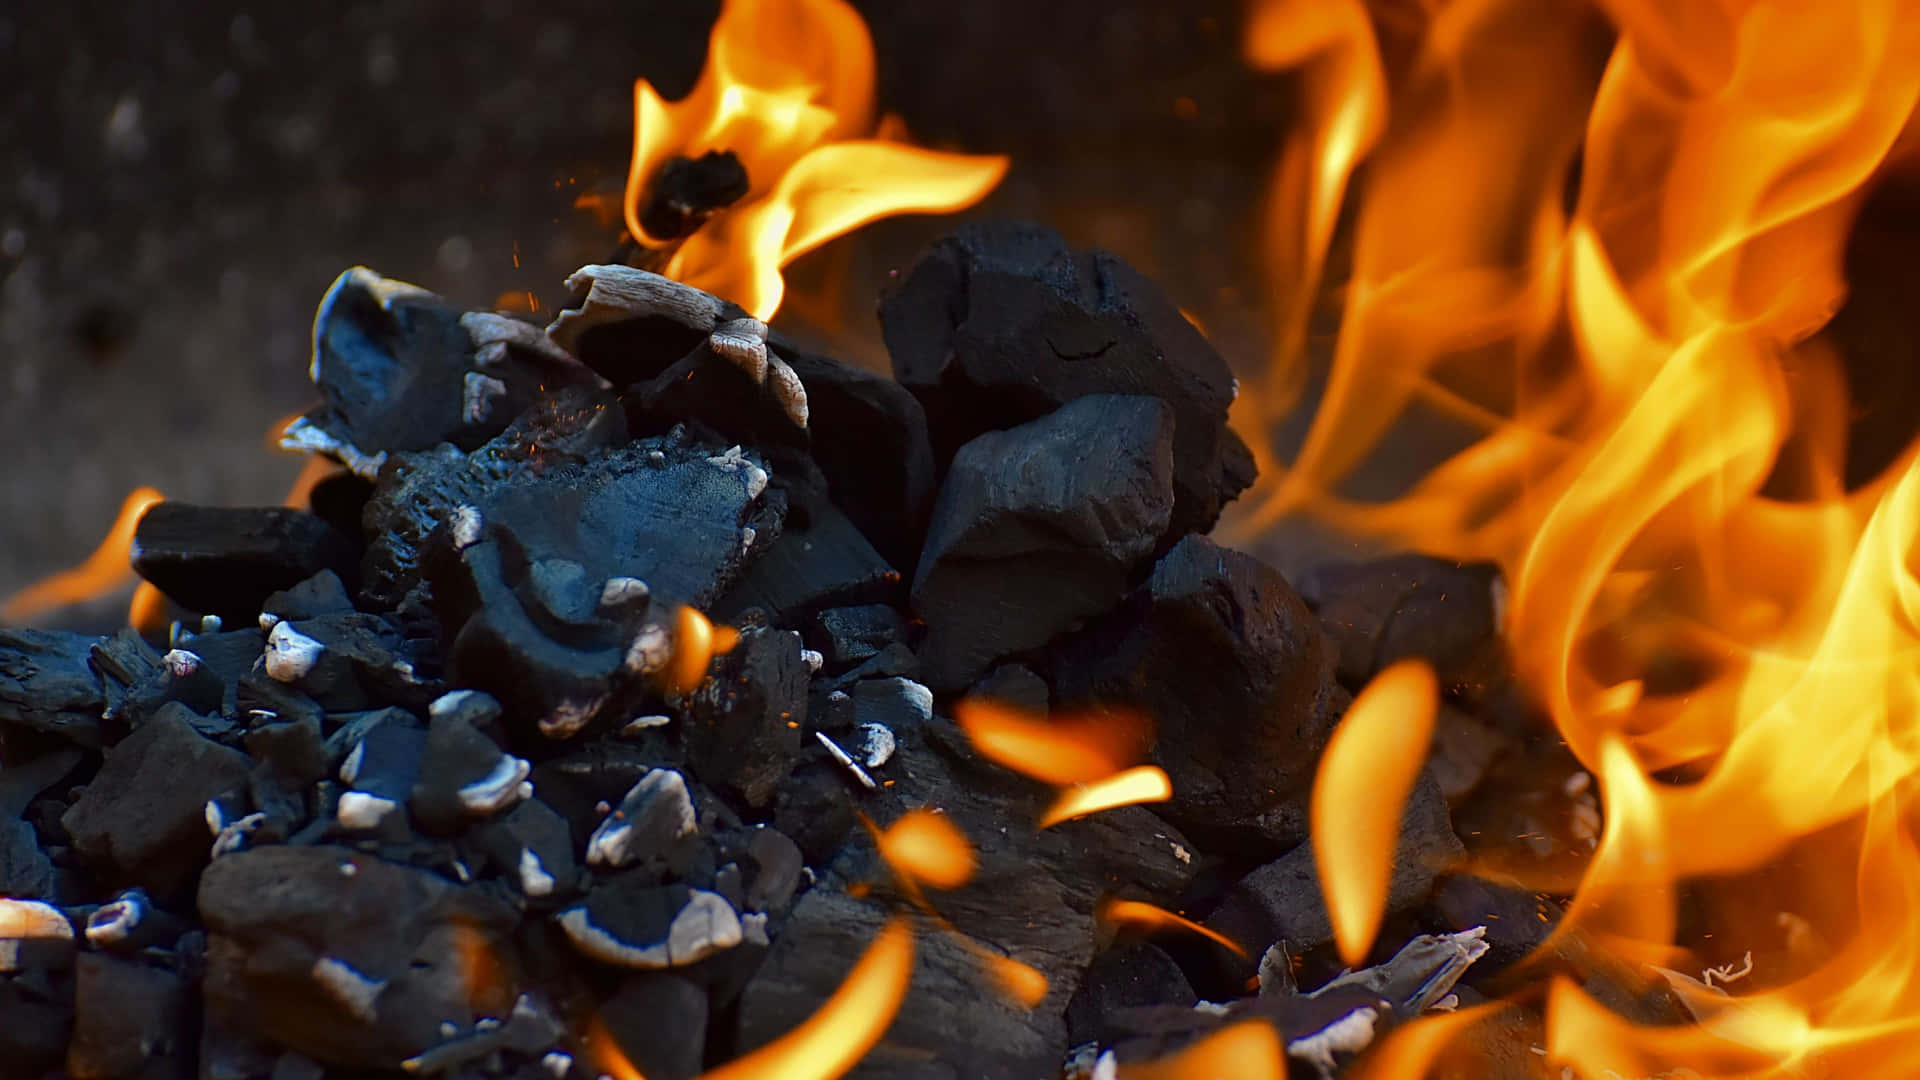 A Close Up Of A Fire With Coal And Flames